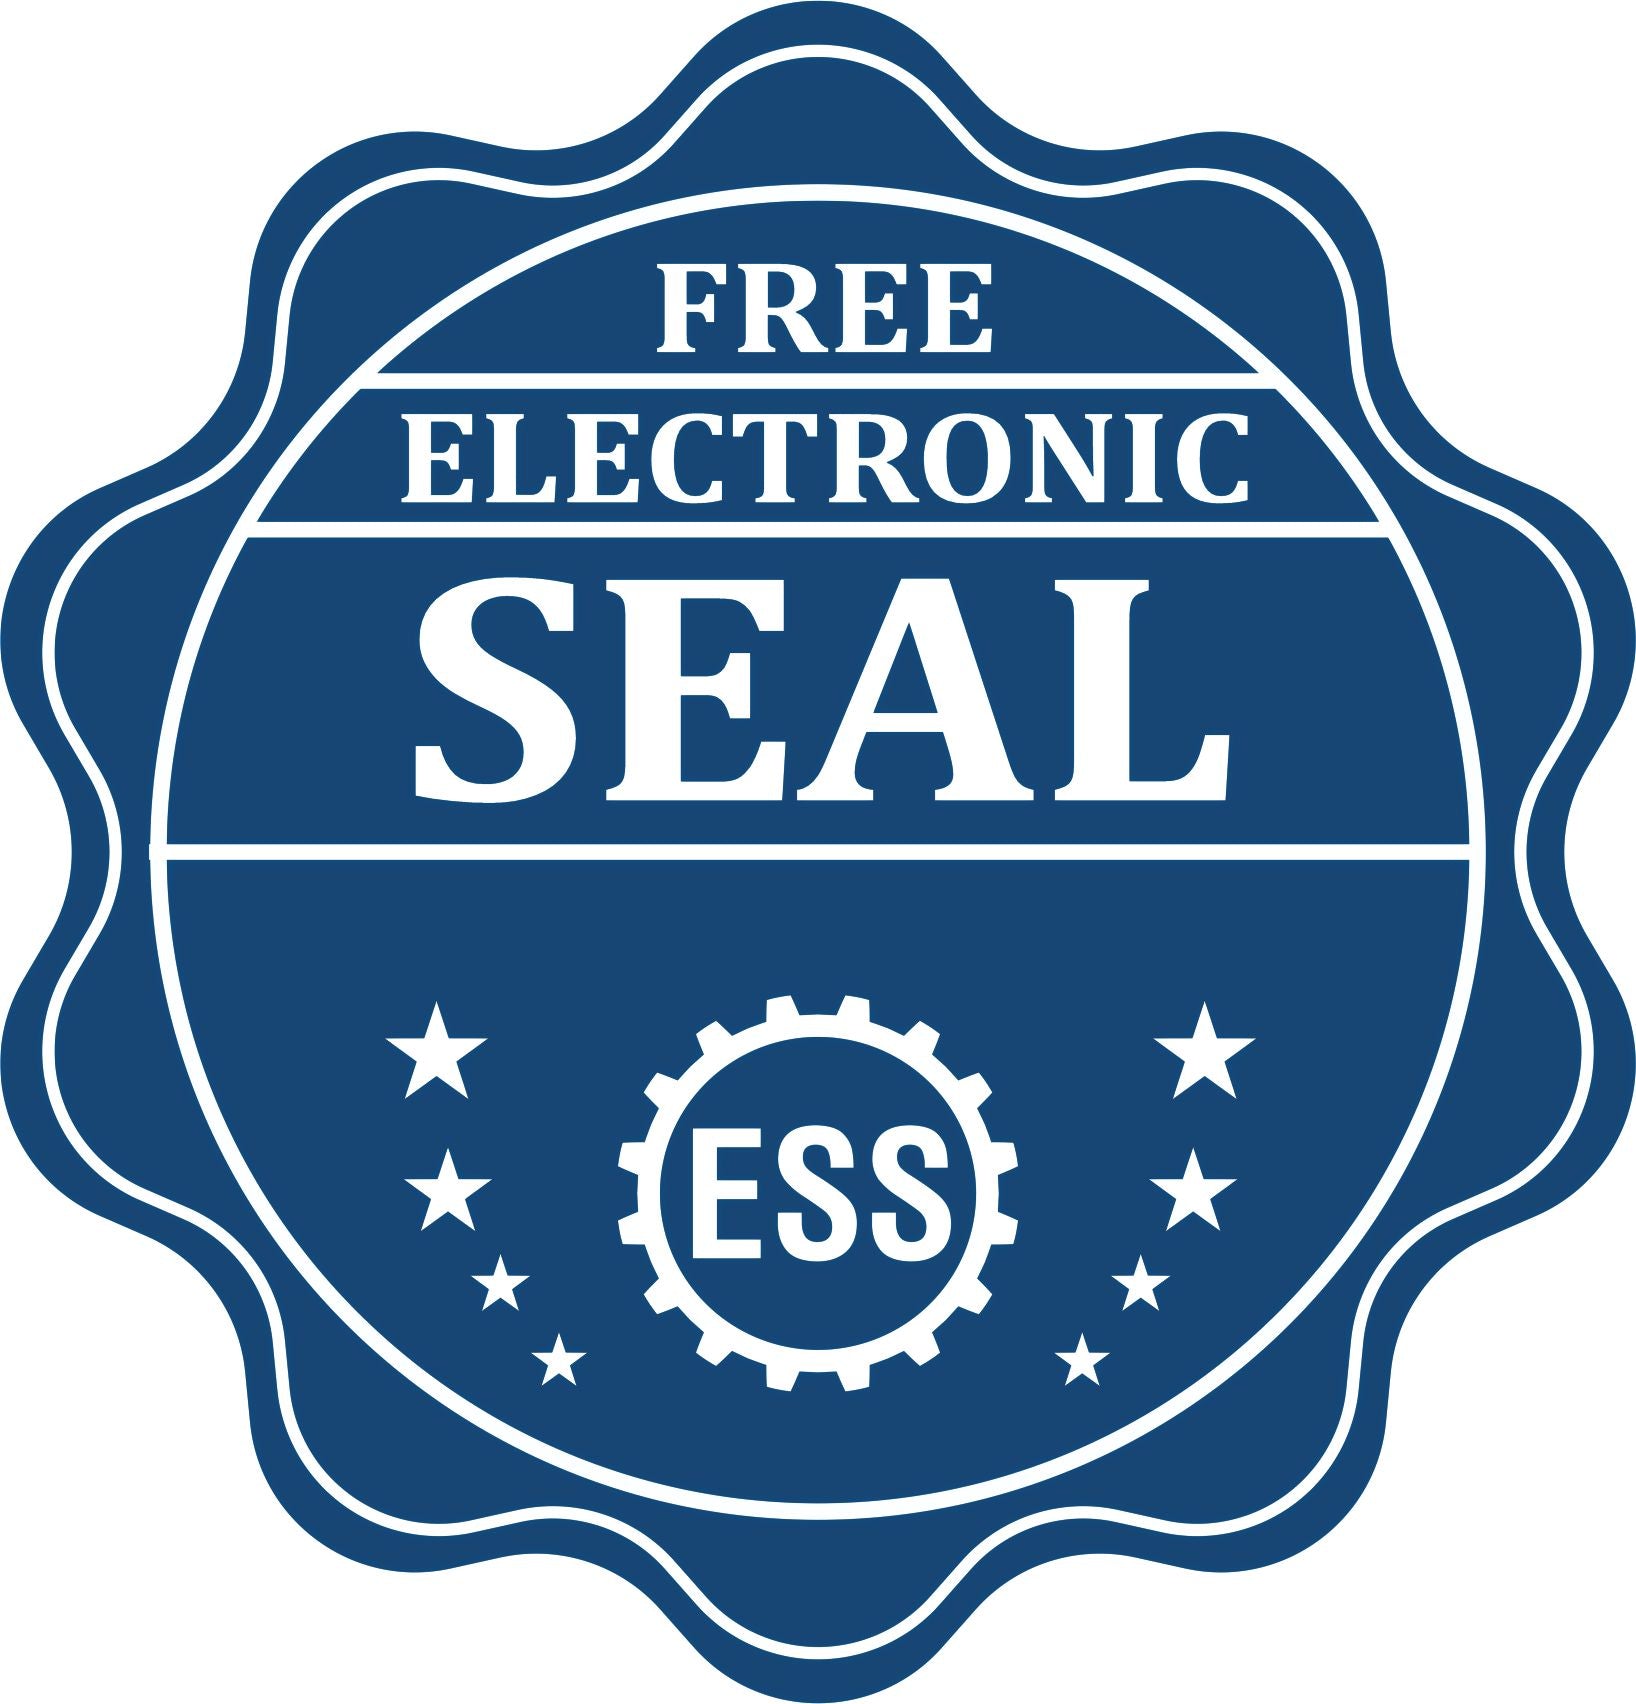 A badge showing a free electronic seal for the Premium MaxLight Pre-Inked New Mexico Geology Stamp with stars and the ESS gear on the emblem.